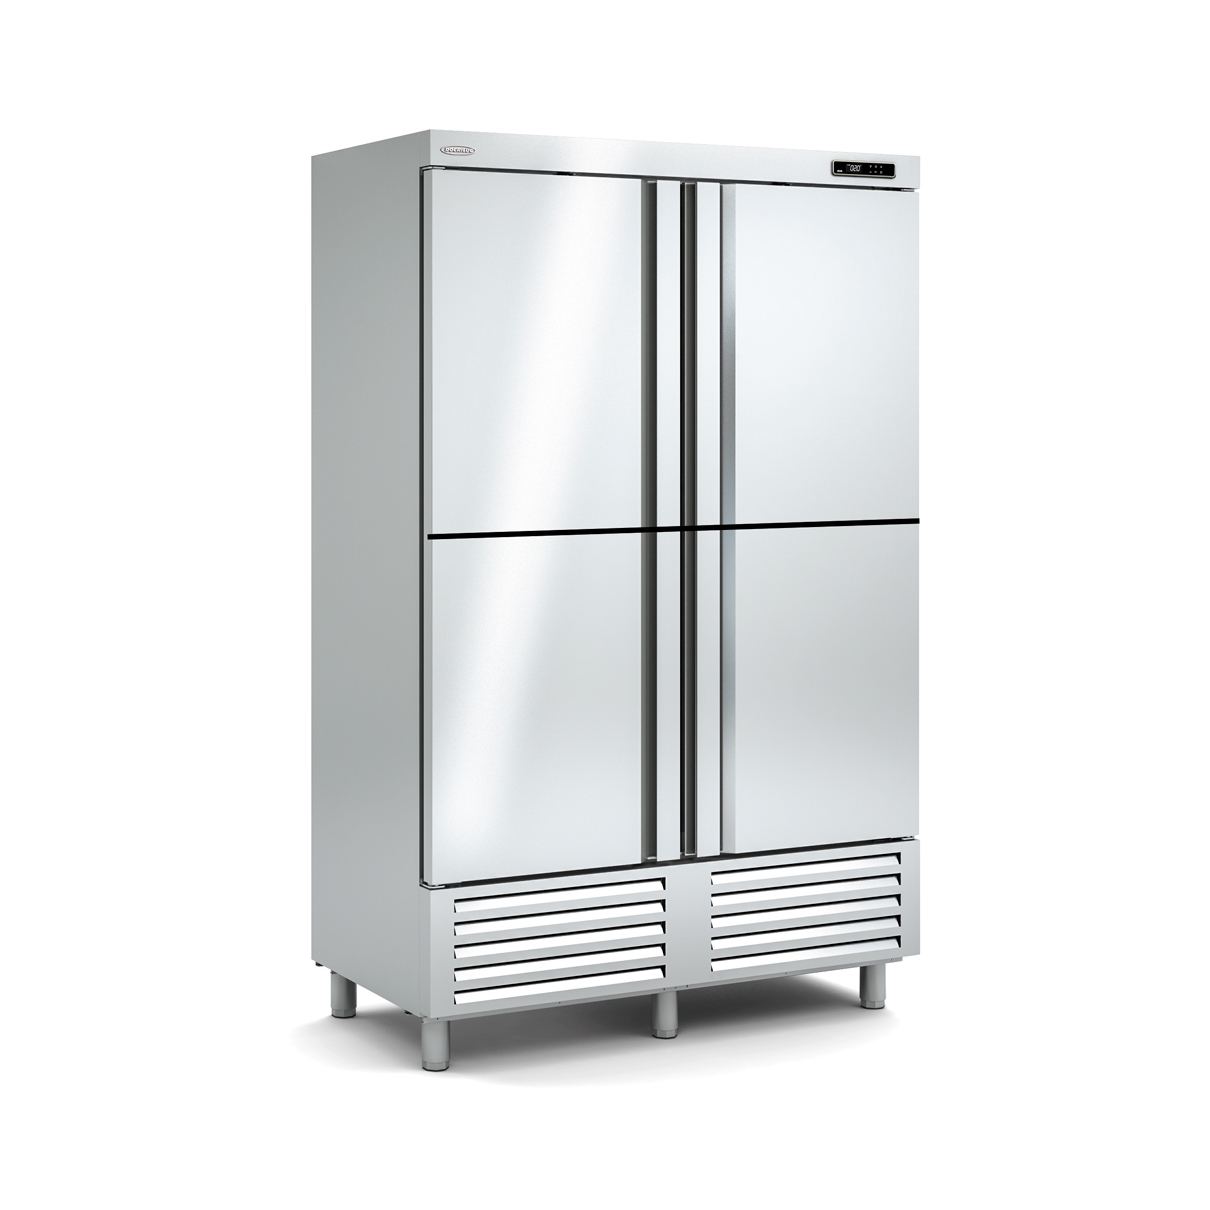 Snack Refrigerated Cabinet ARS-140-4